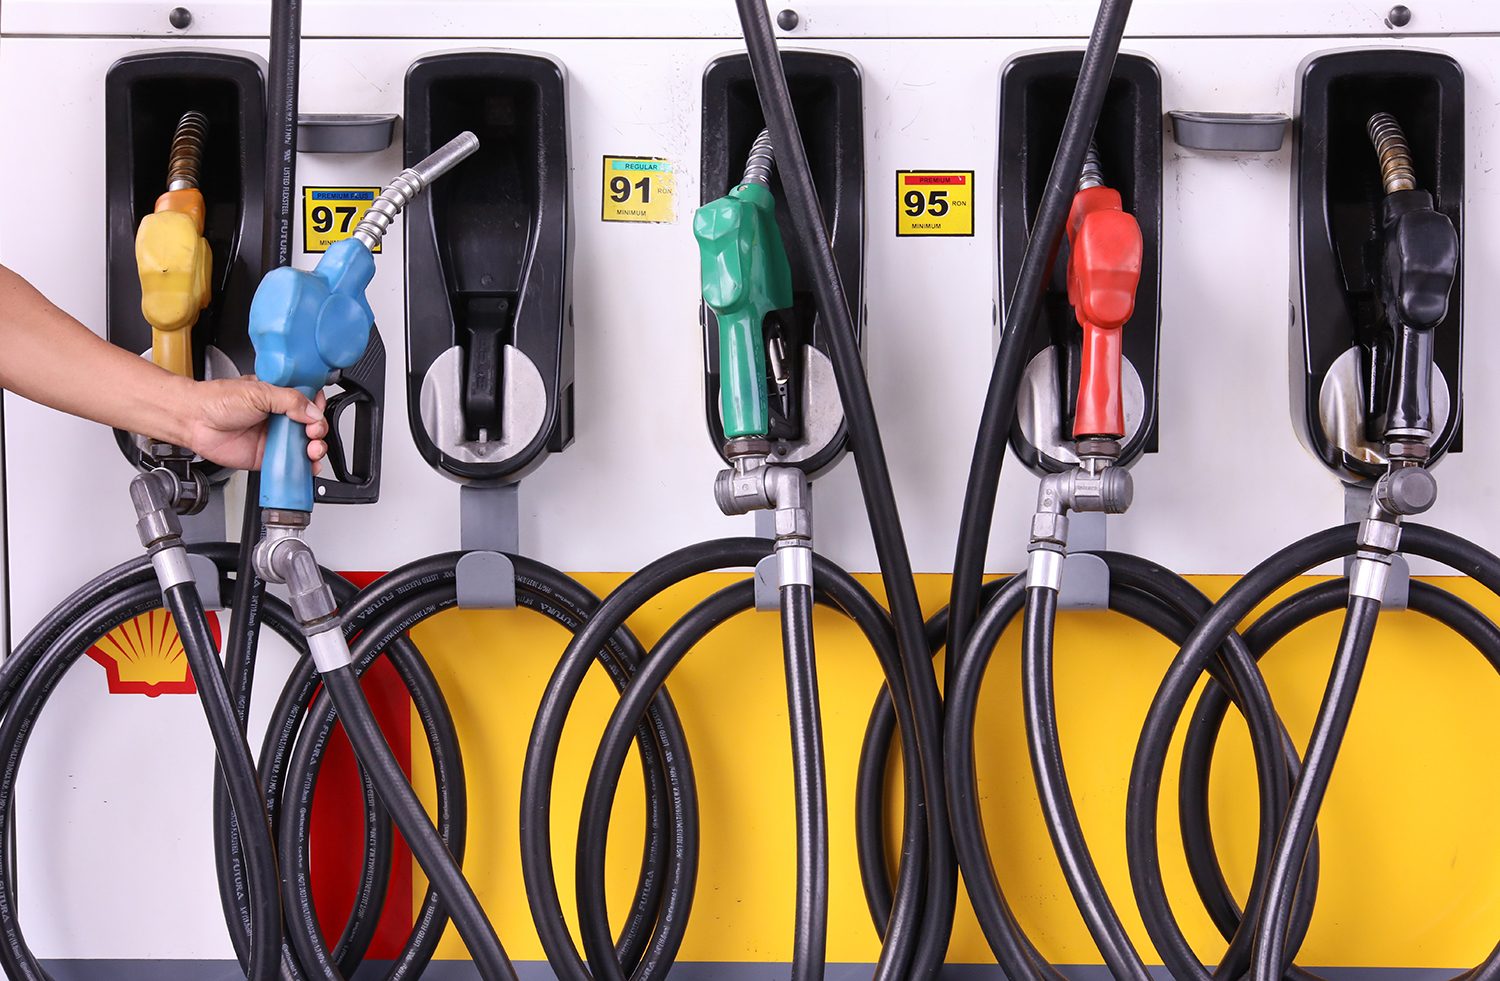 DOE to oil firms: Use up old inventory first before slapping new tax